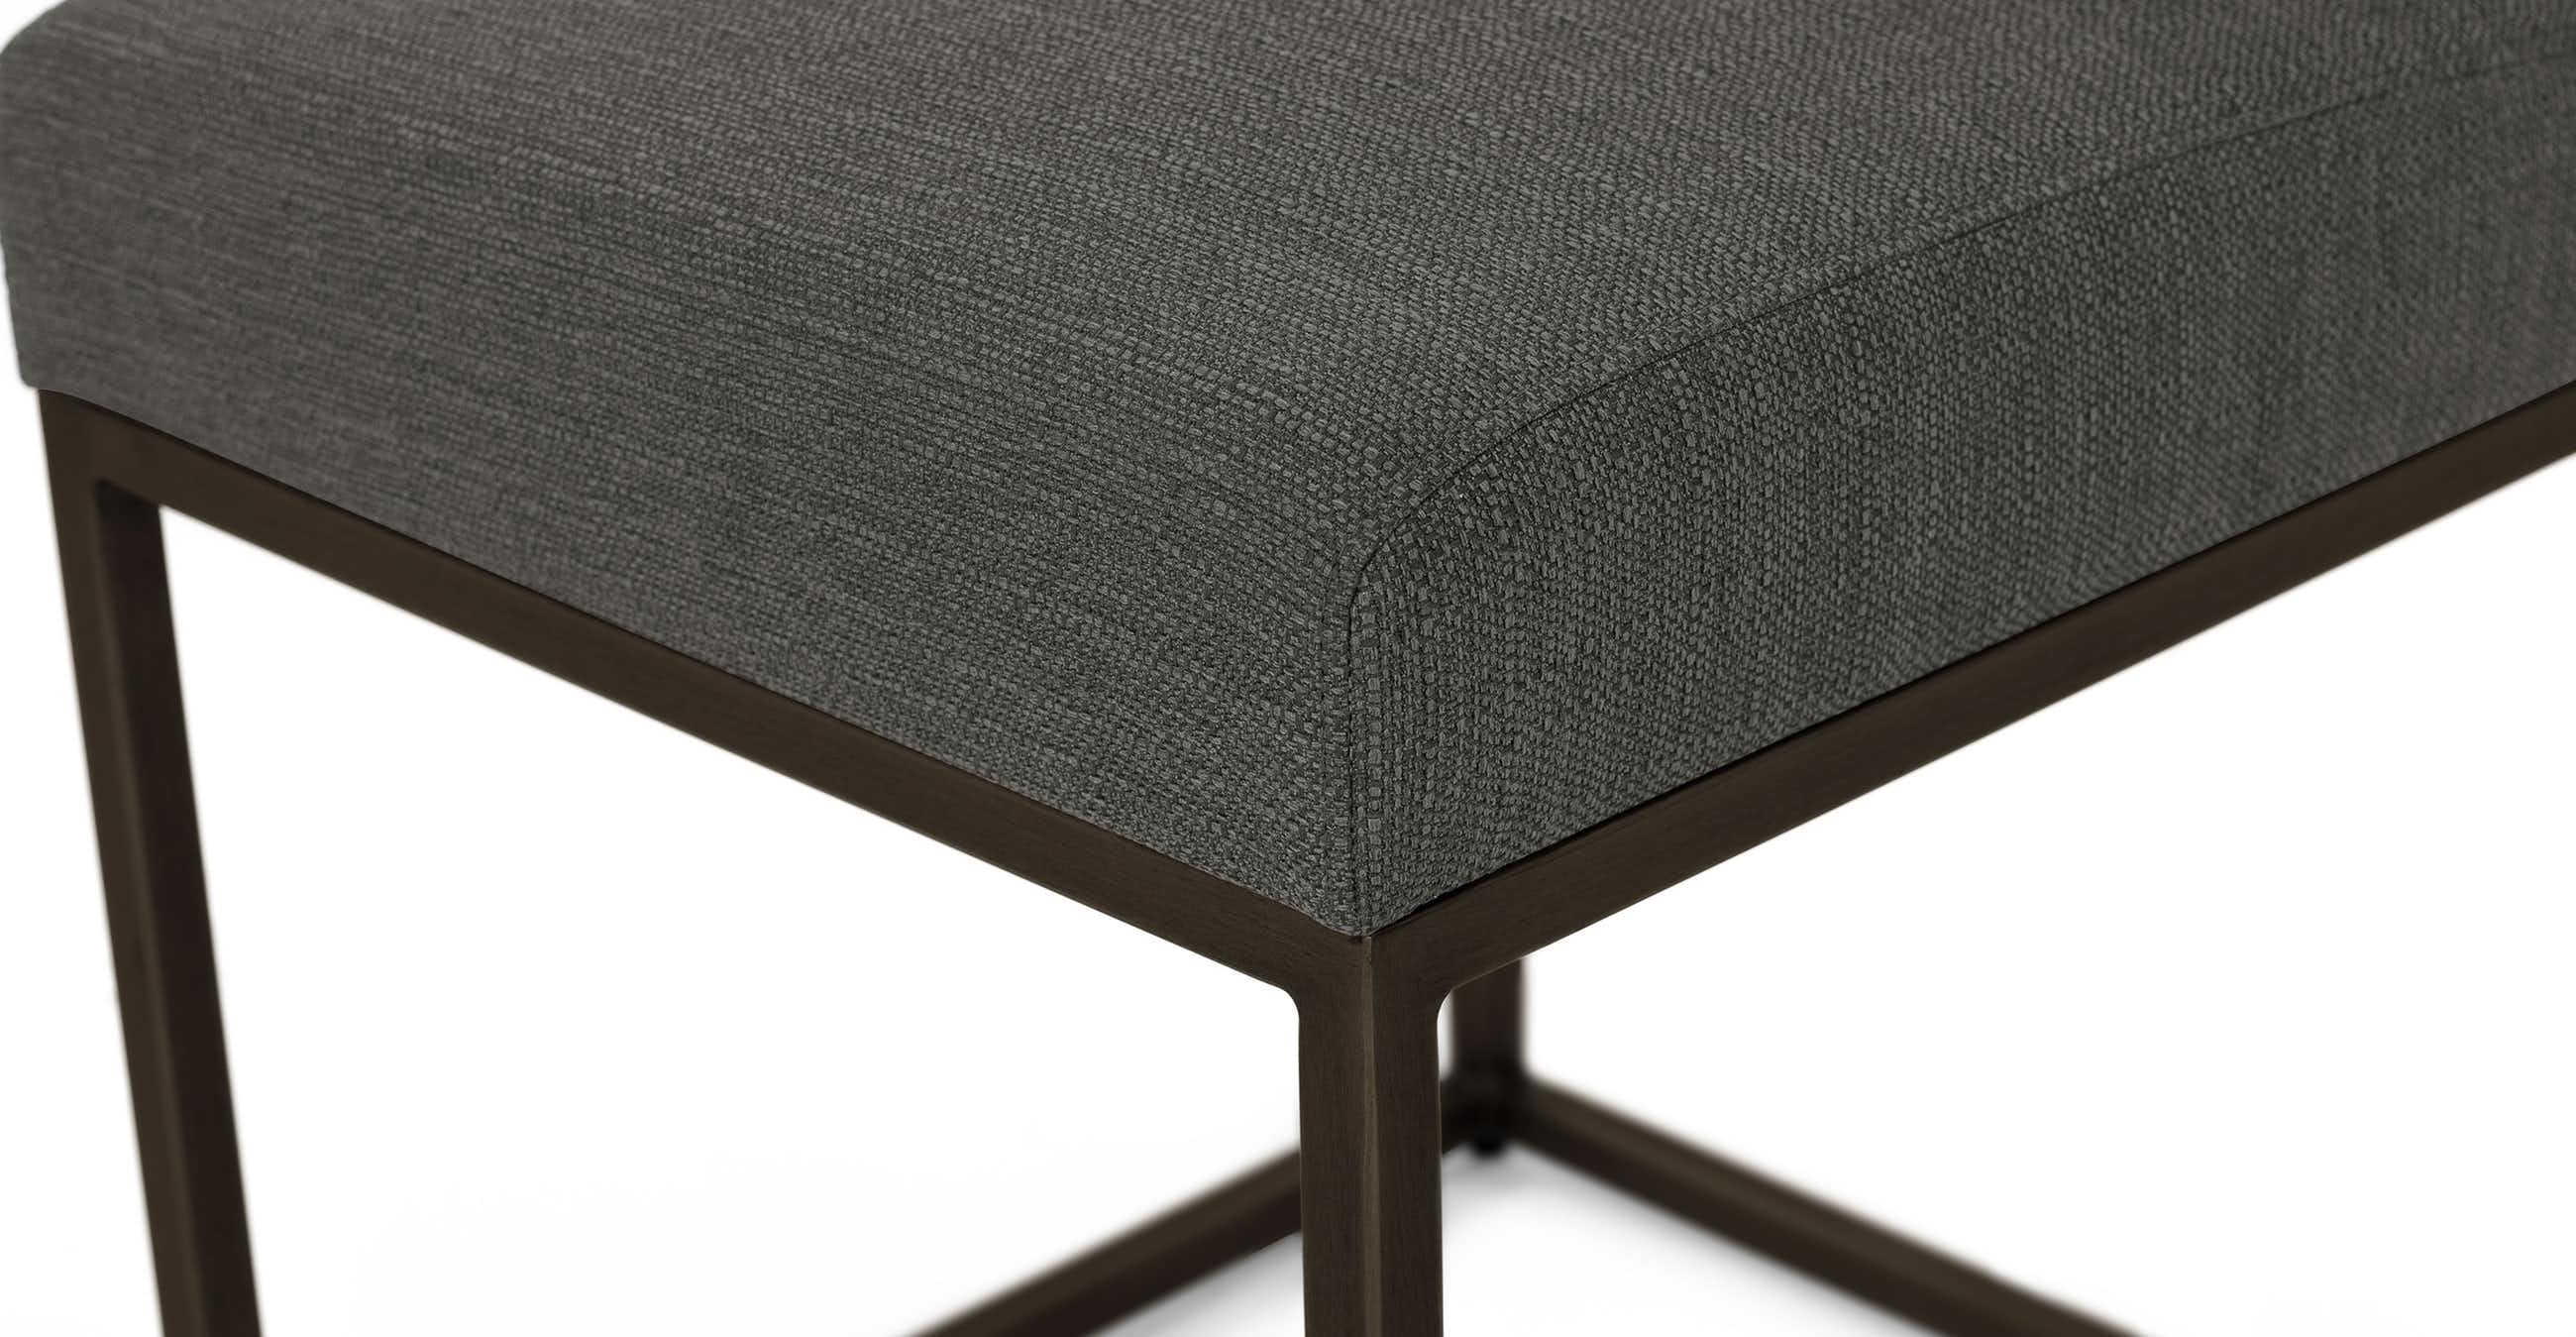 Oscuro Cinder Gray Dining Chair - Image 5